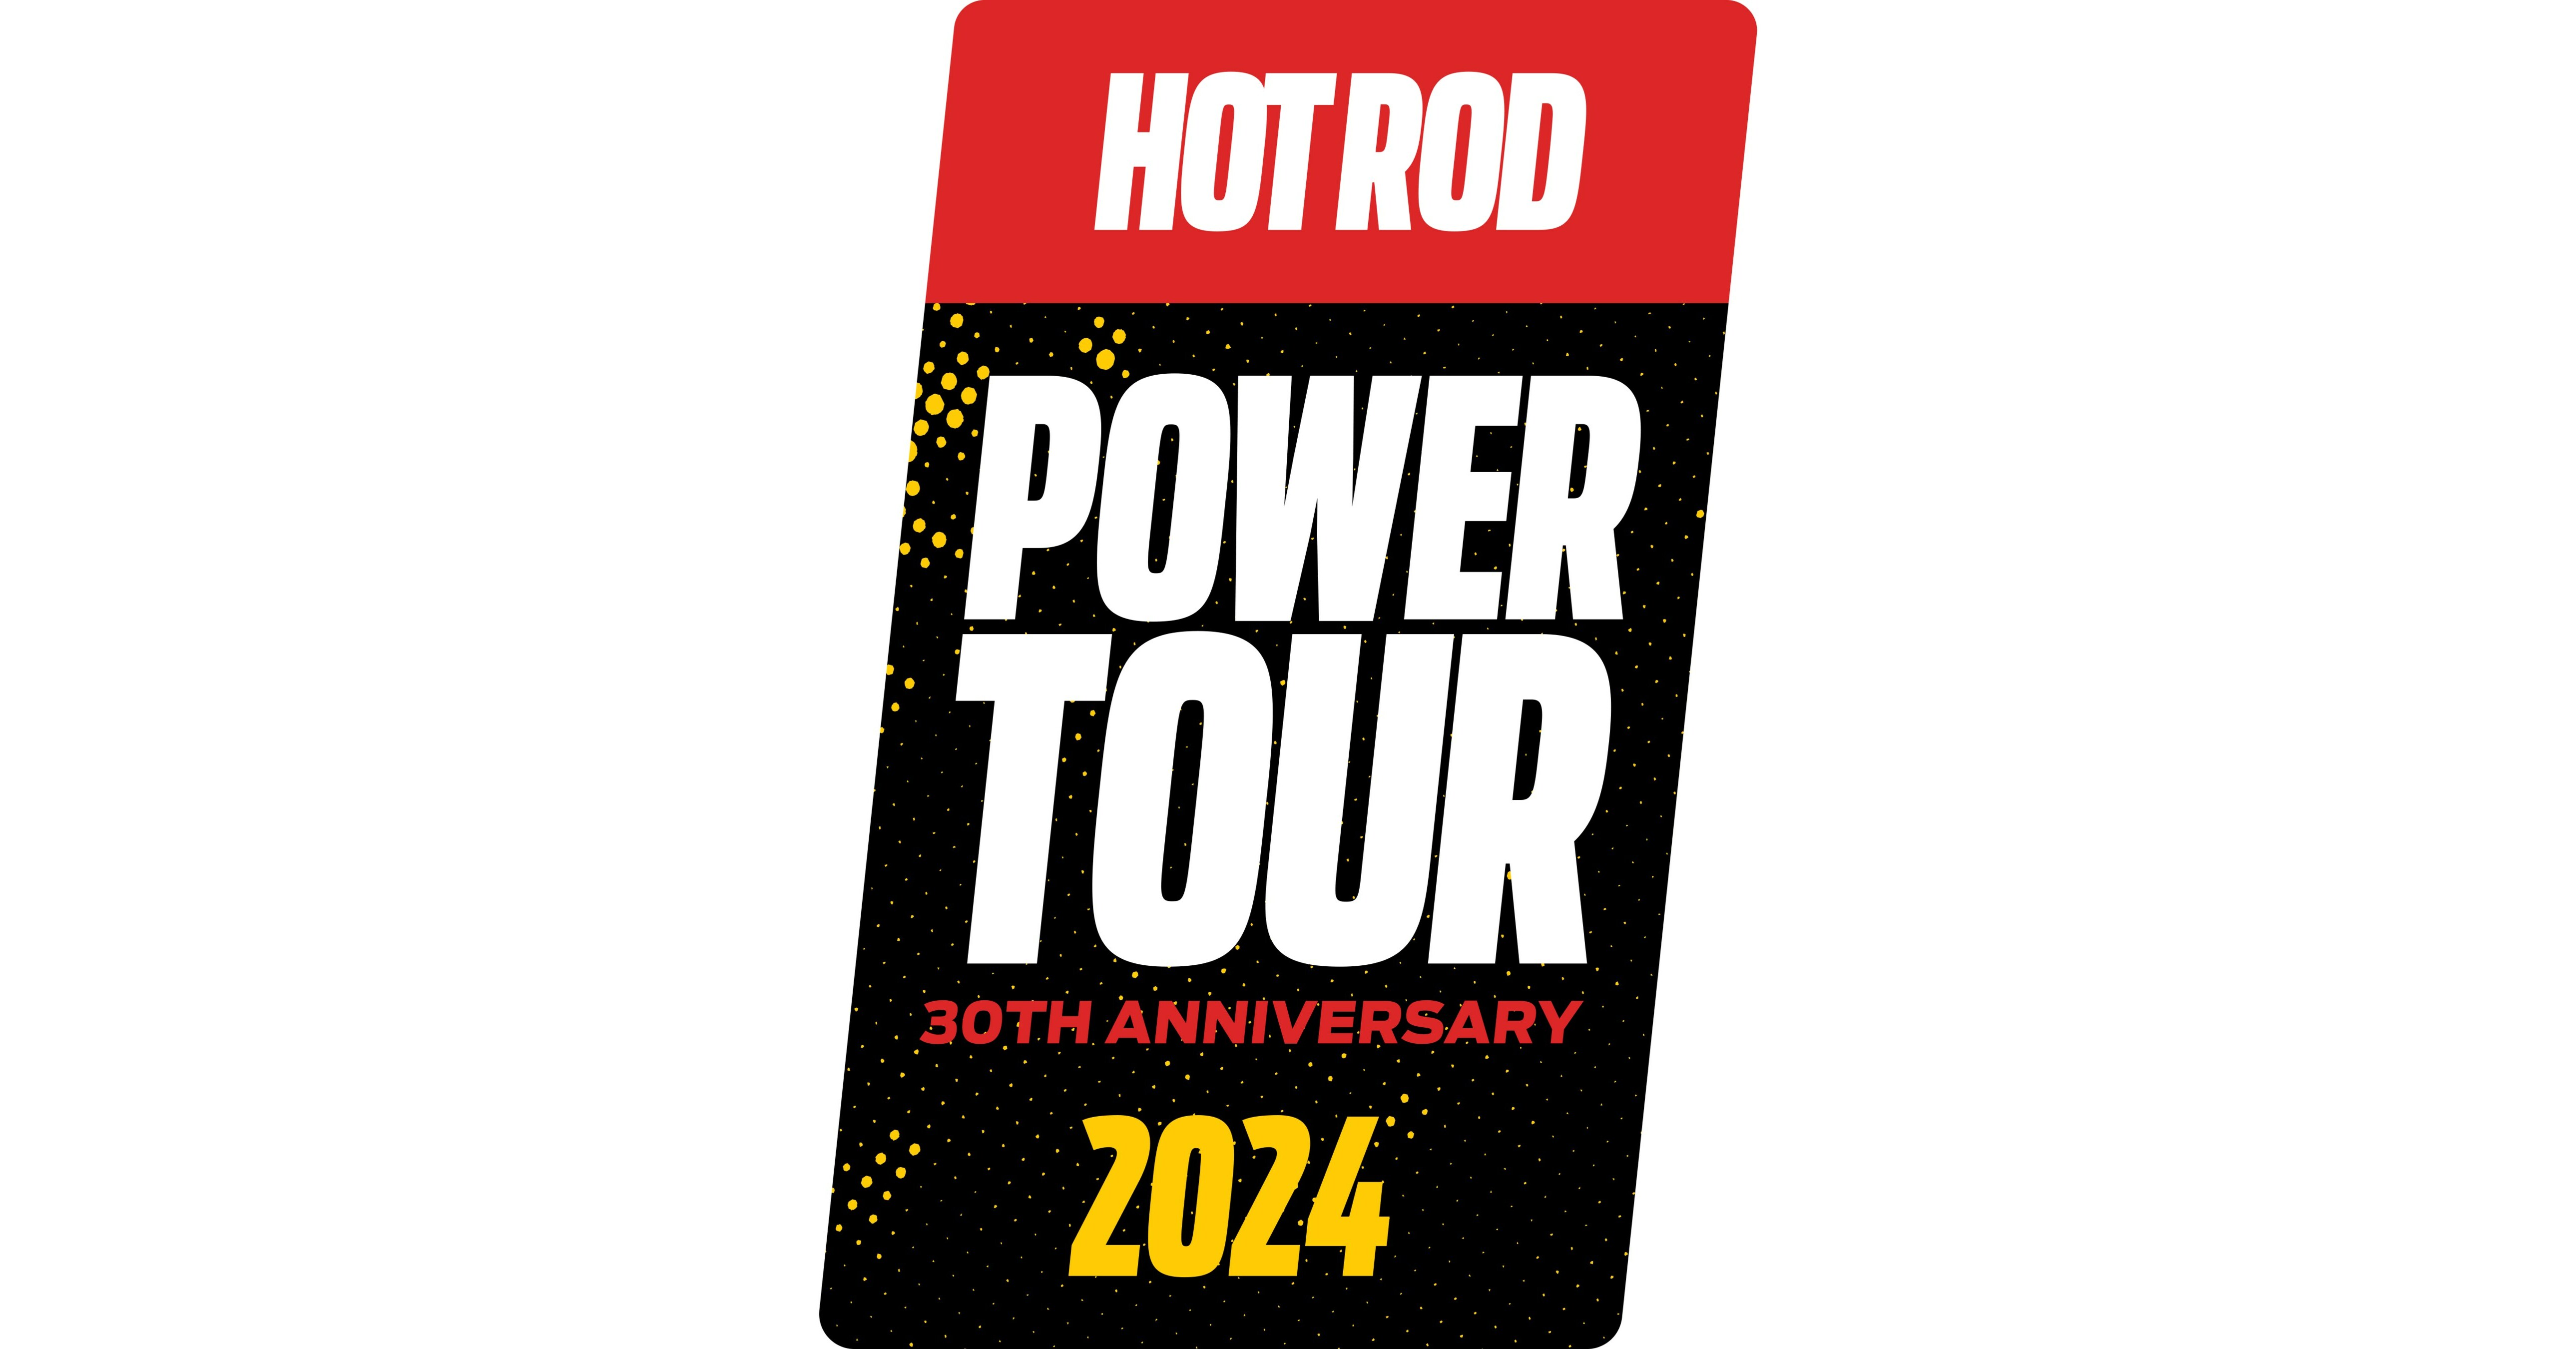 Legendary HOT ROD Power Tour Celebrates 30th Anniversary with Stops at